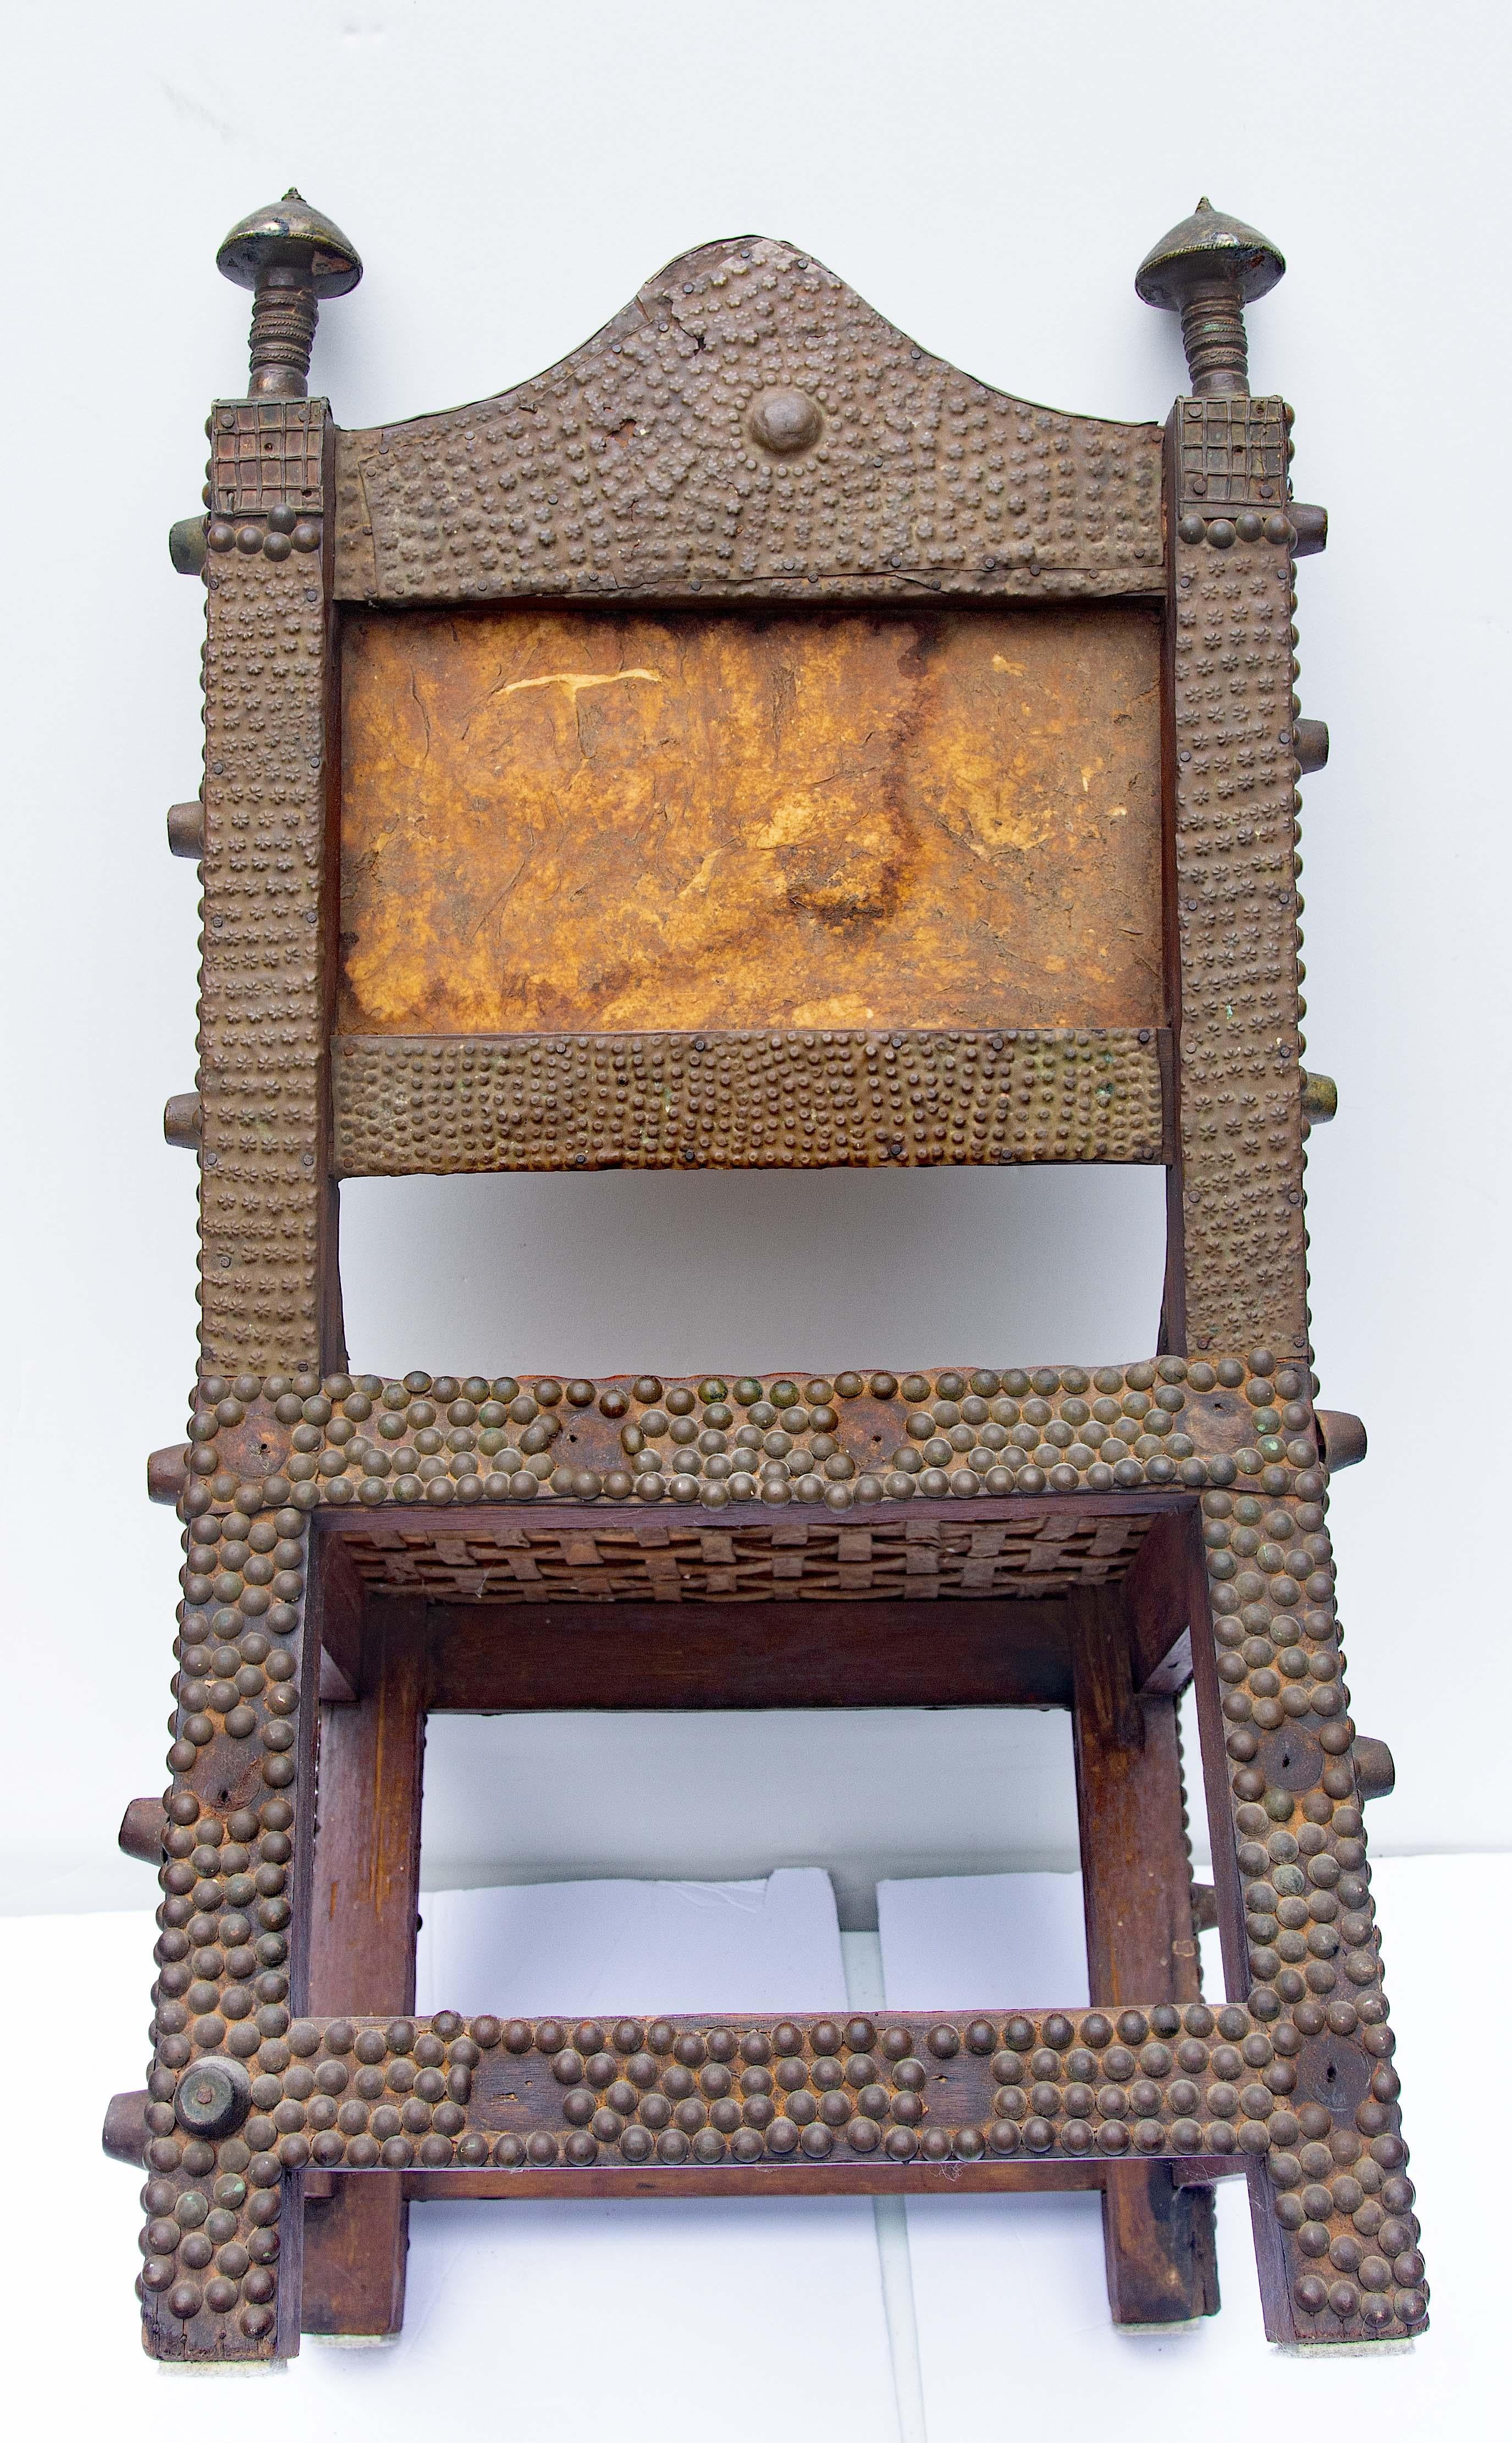 African Ashanti tribe chiefs chair. Highly decorated with brass tacks and pressed brass decorations. Hardwood with vellum back and seat. Ghana. Late 19th century.